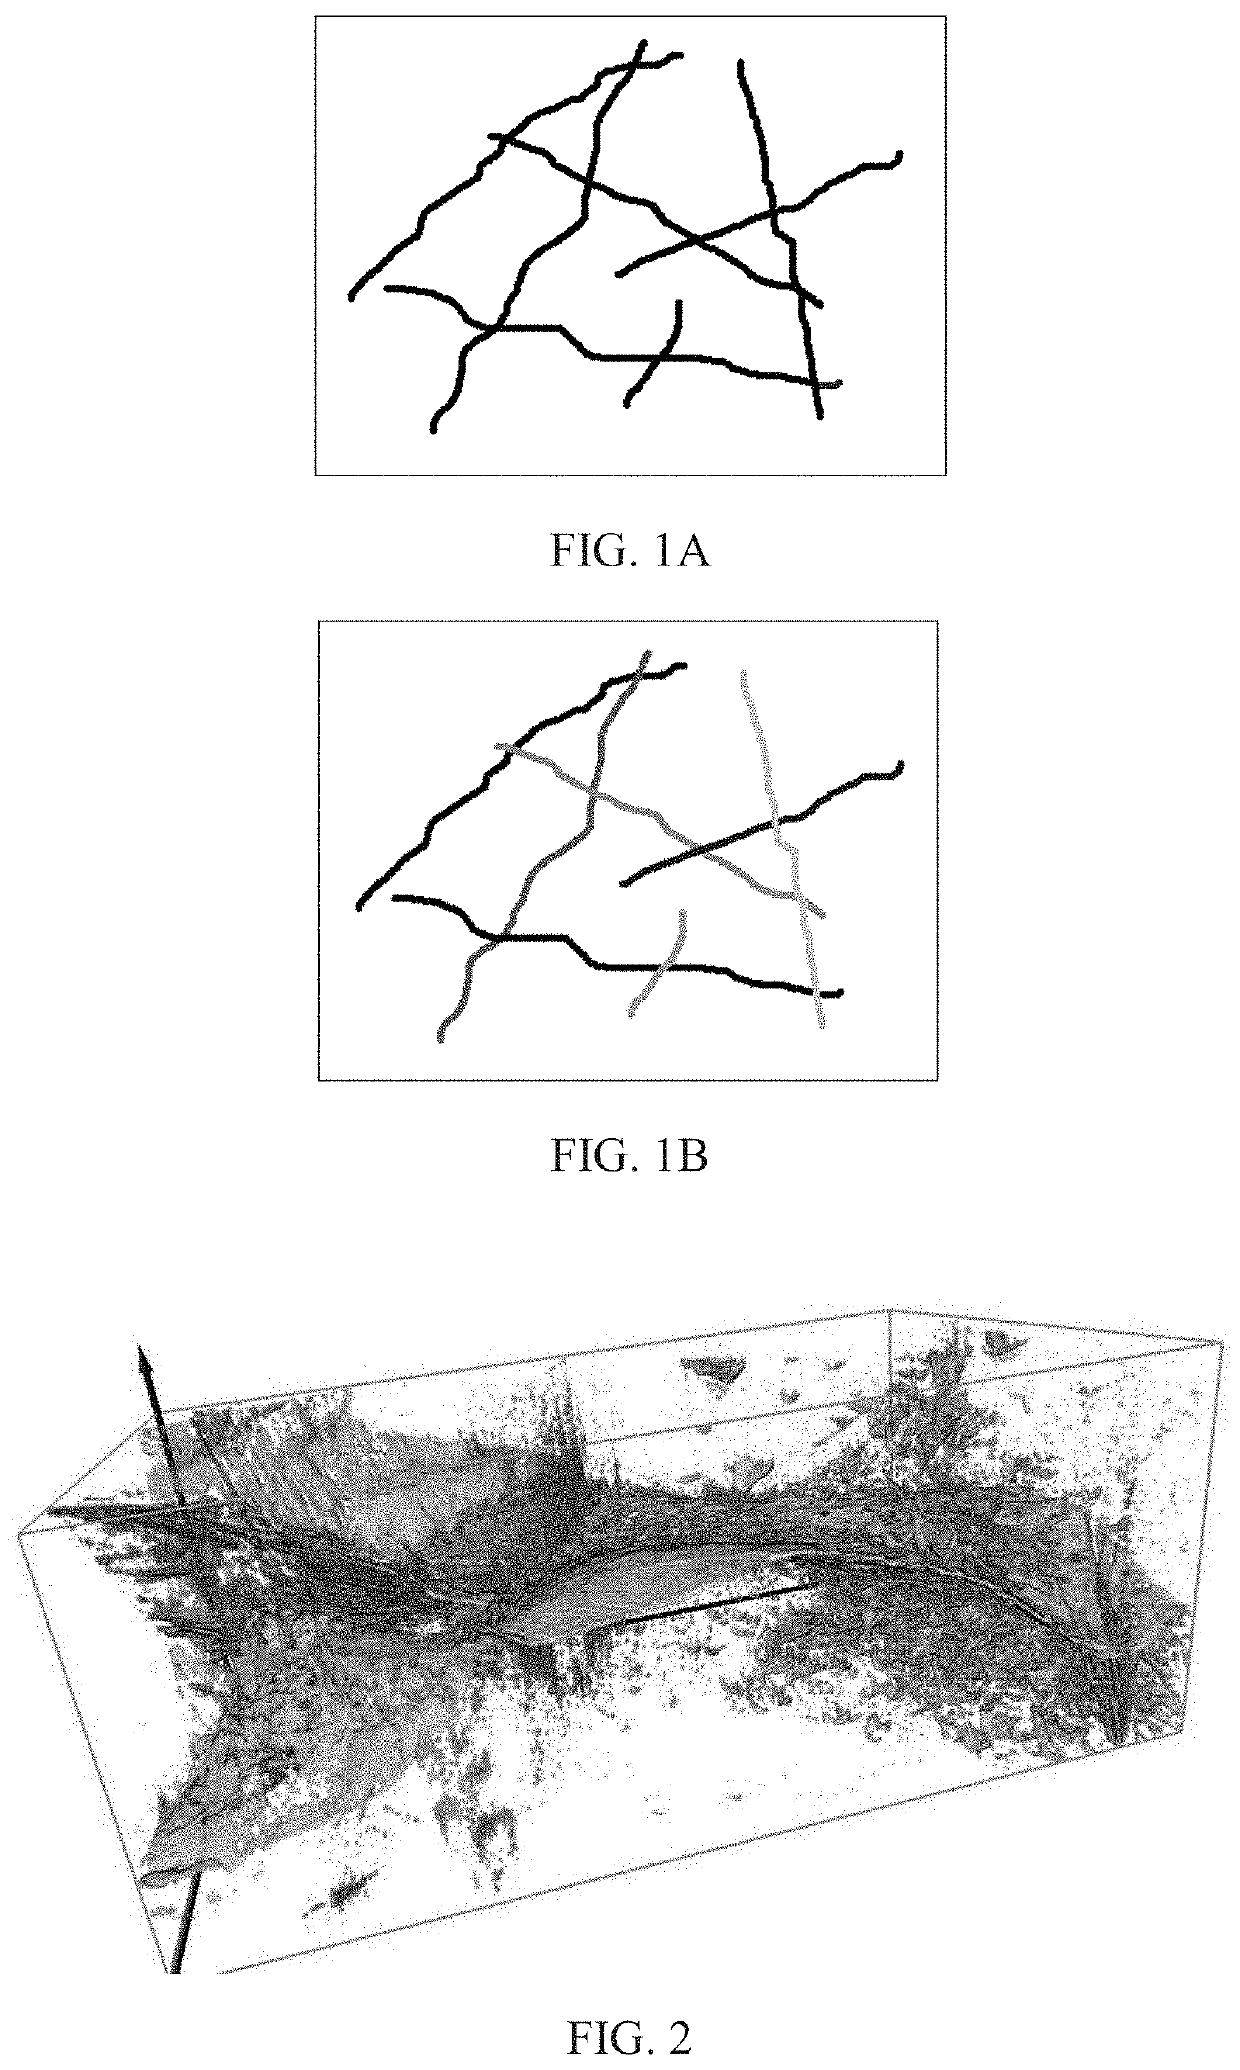 Method of separating, identifying and characterizing cracks in 3D space